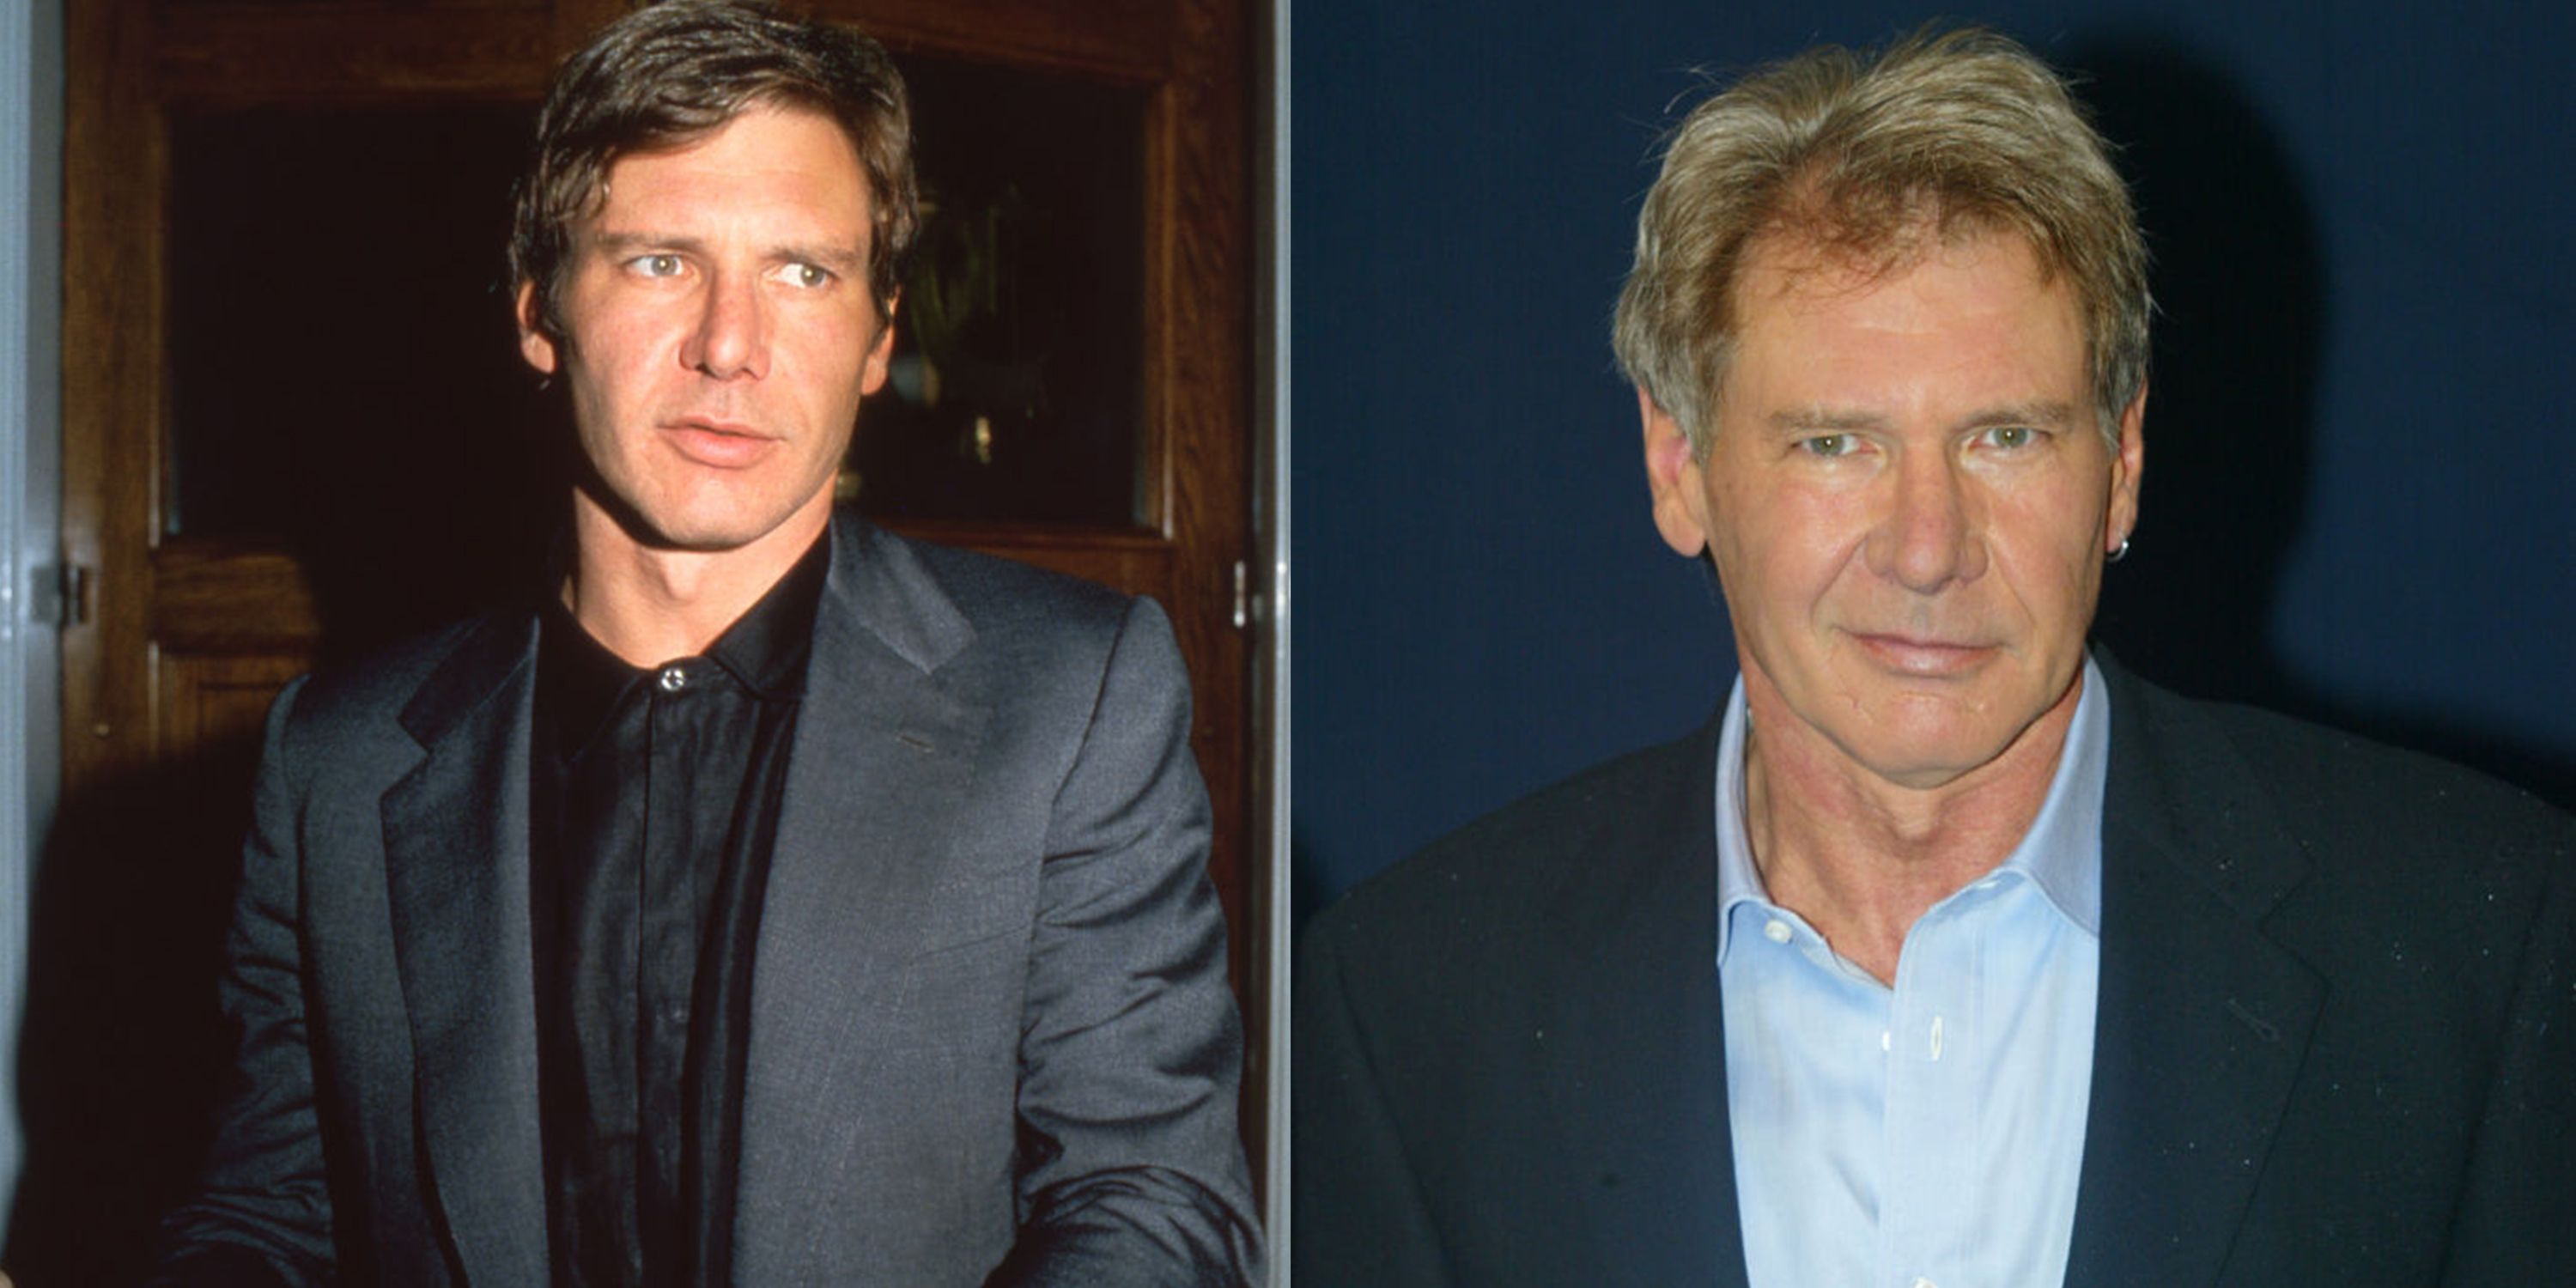 Harrison Ford is 'doing really well' after Star Wars Episode 7